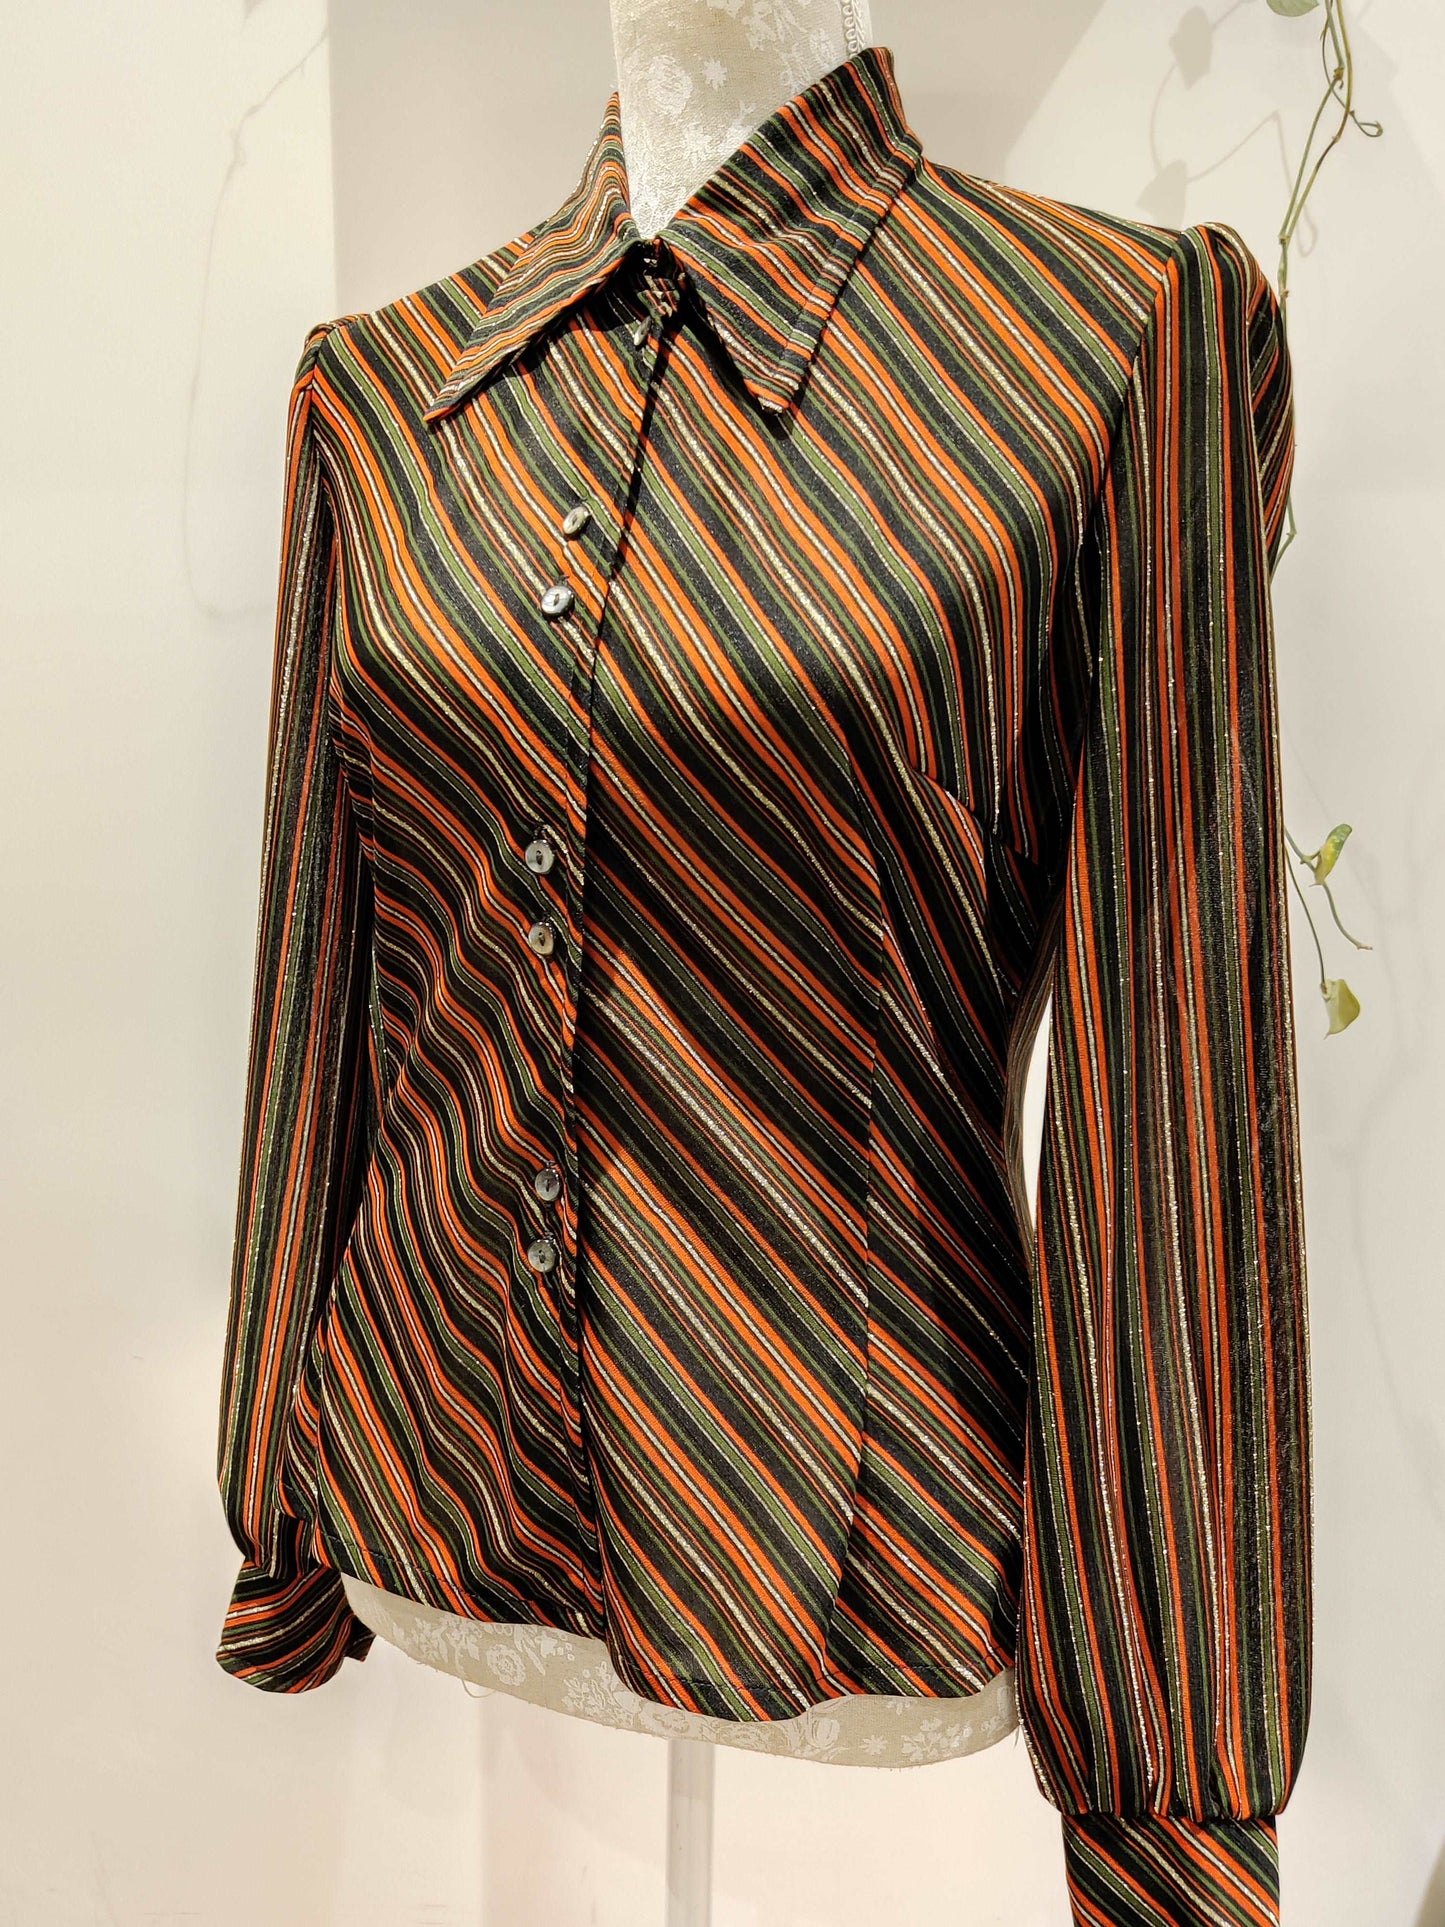 Lurex stripe 70s shirt with long sleeves. 8